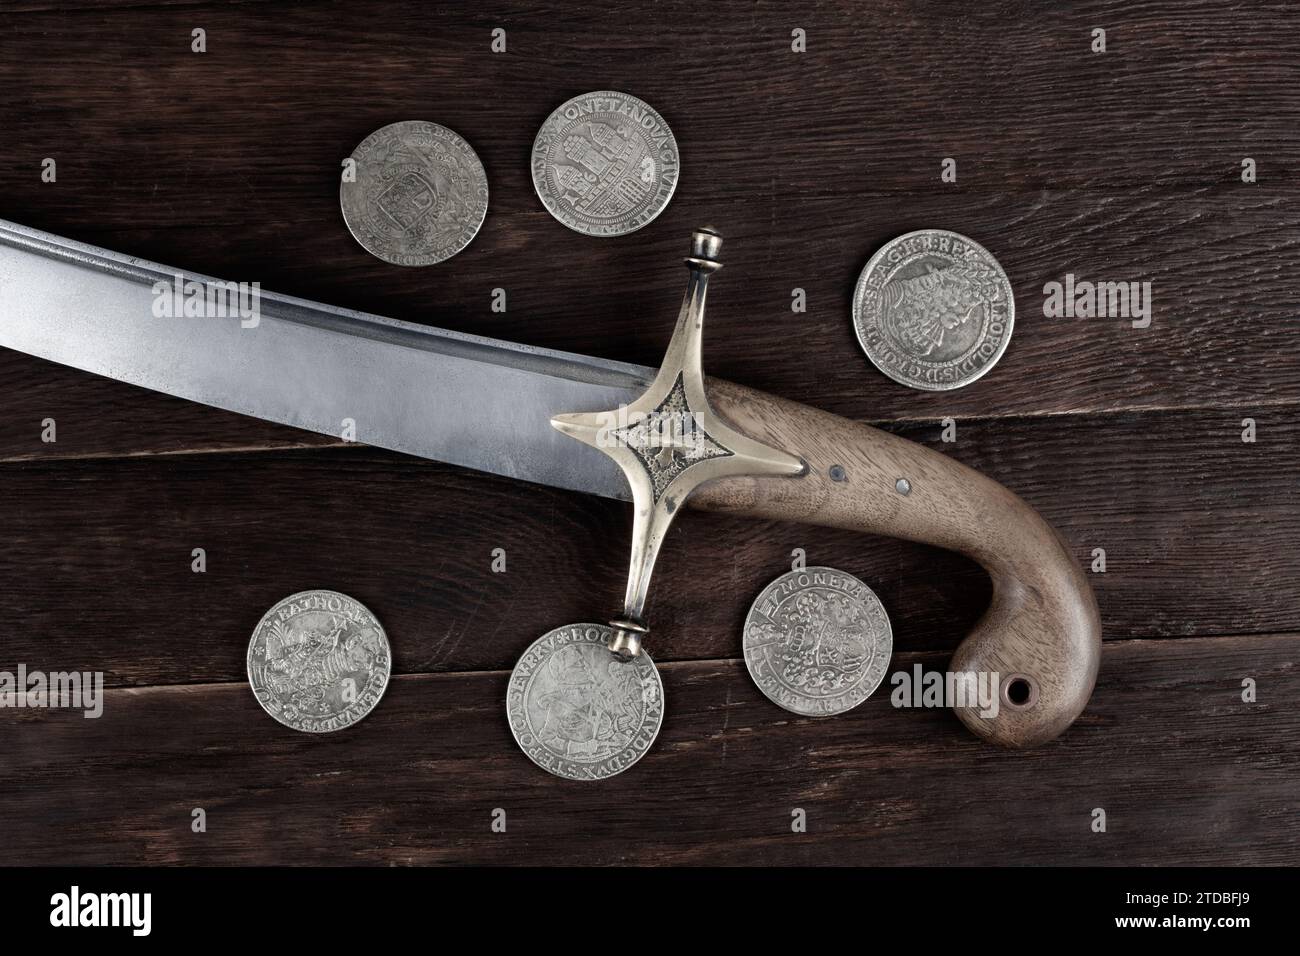 Ukraine Saber Sword with silver taller coins on wooden deck, 17th century. Poland, Lithuania, Hungary, Ukraine. Stock Photo